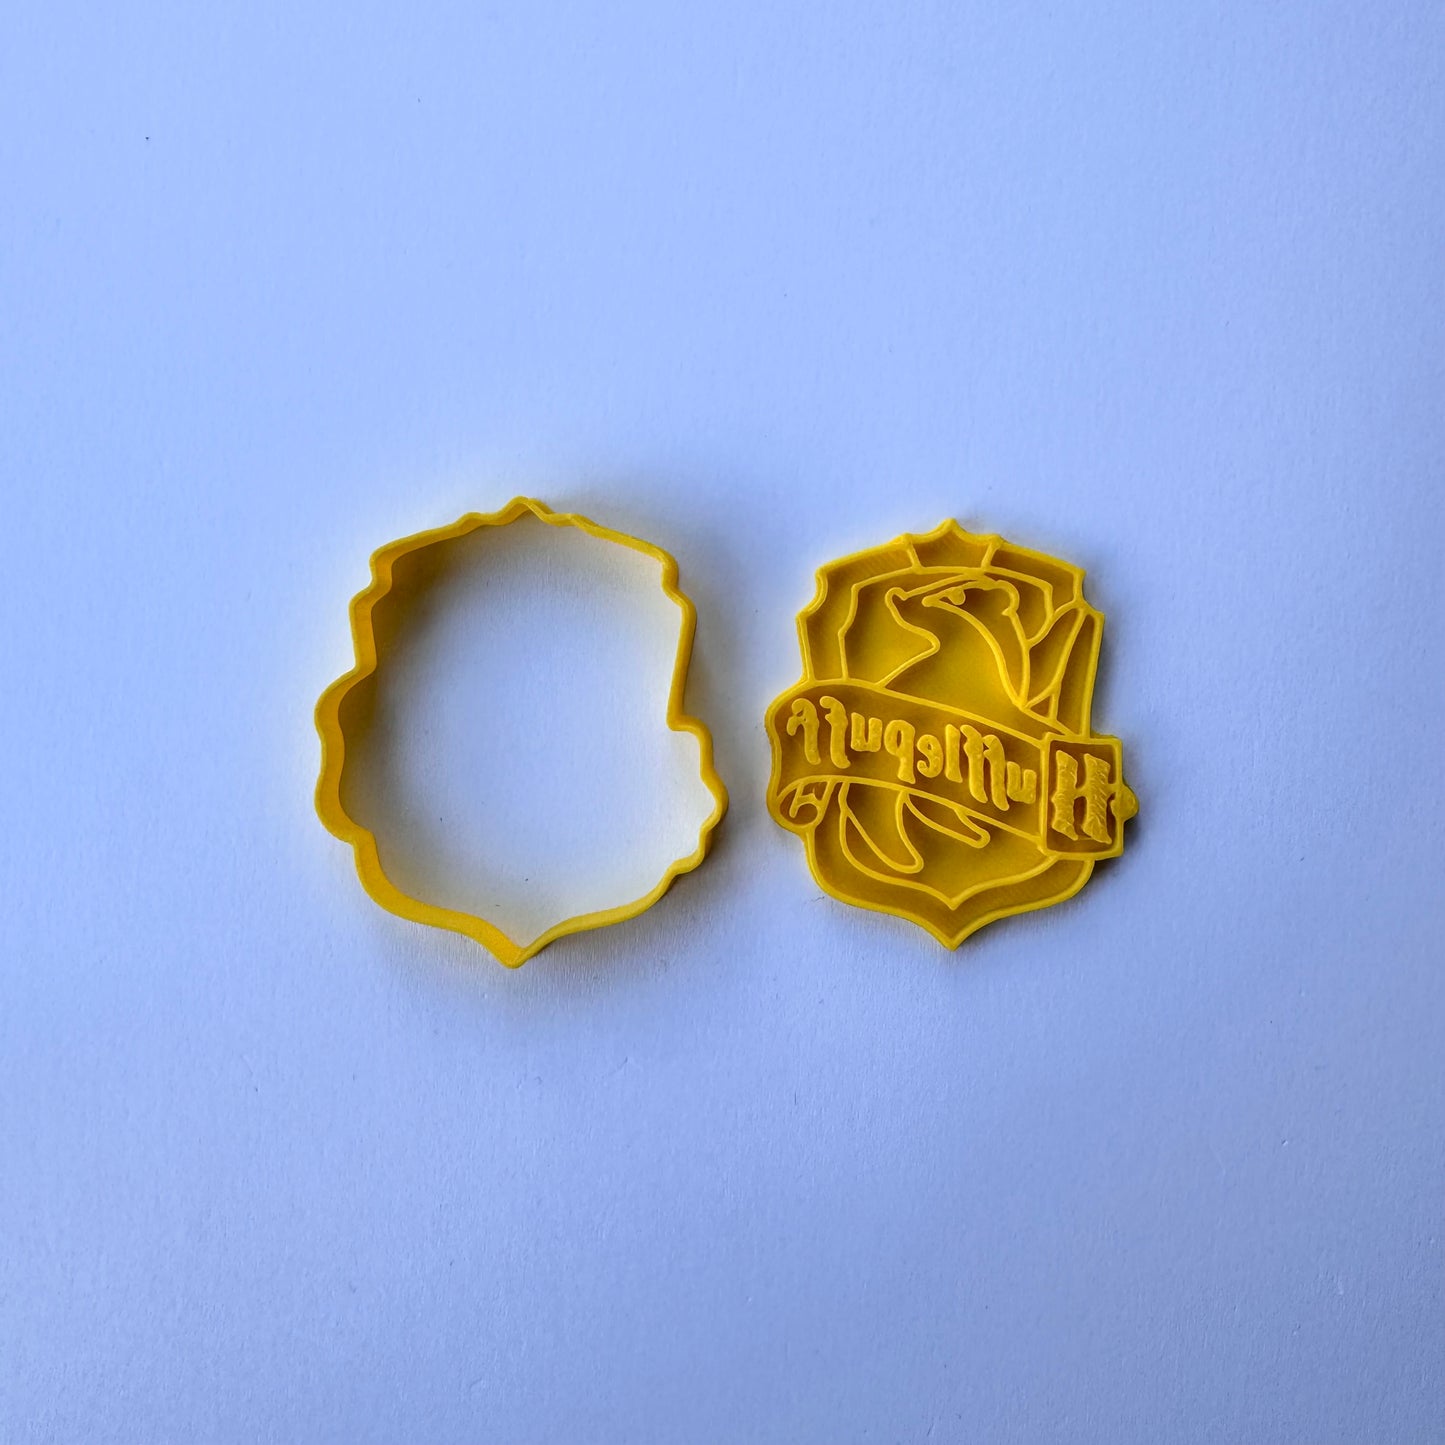 Hufflepuff badge Harry Potter-inspired Cookie Cutter Fondant Cake Decorating